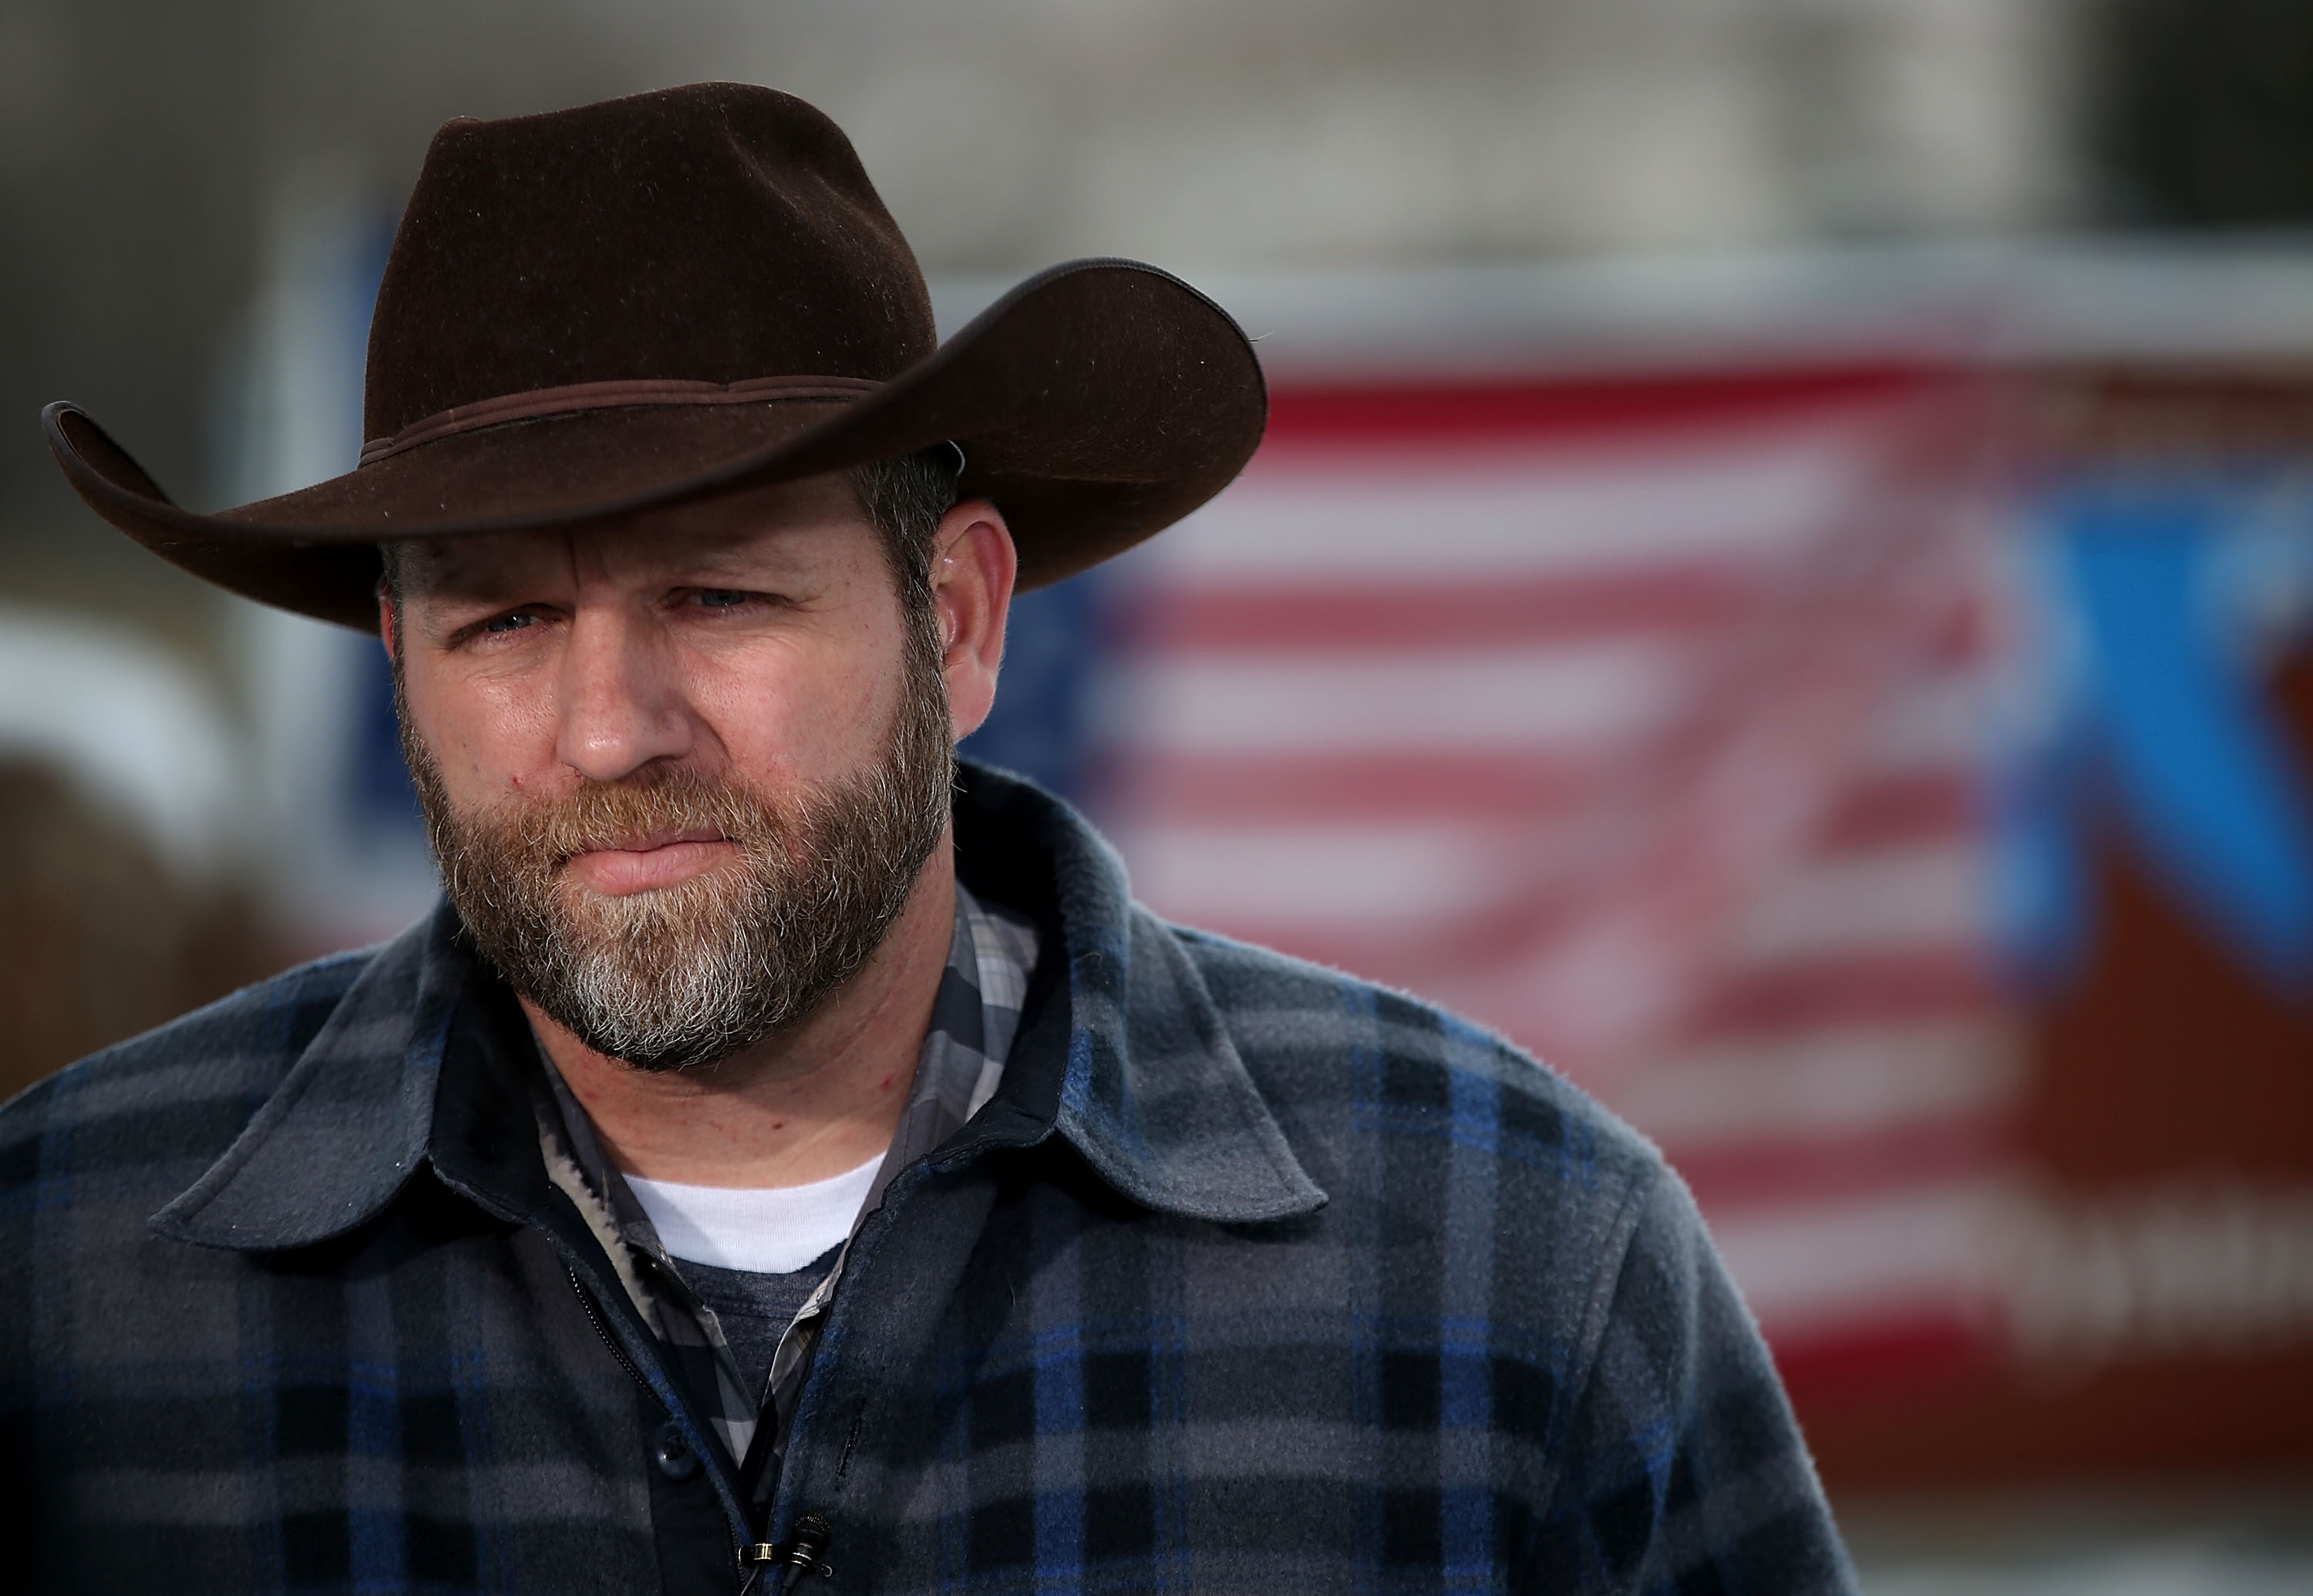 Far-right activist Ammon Bundy arrested after ignoring lawsuit for a year